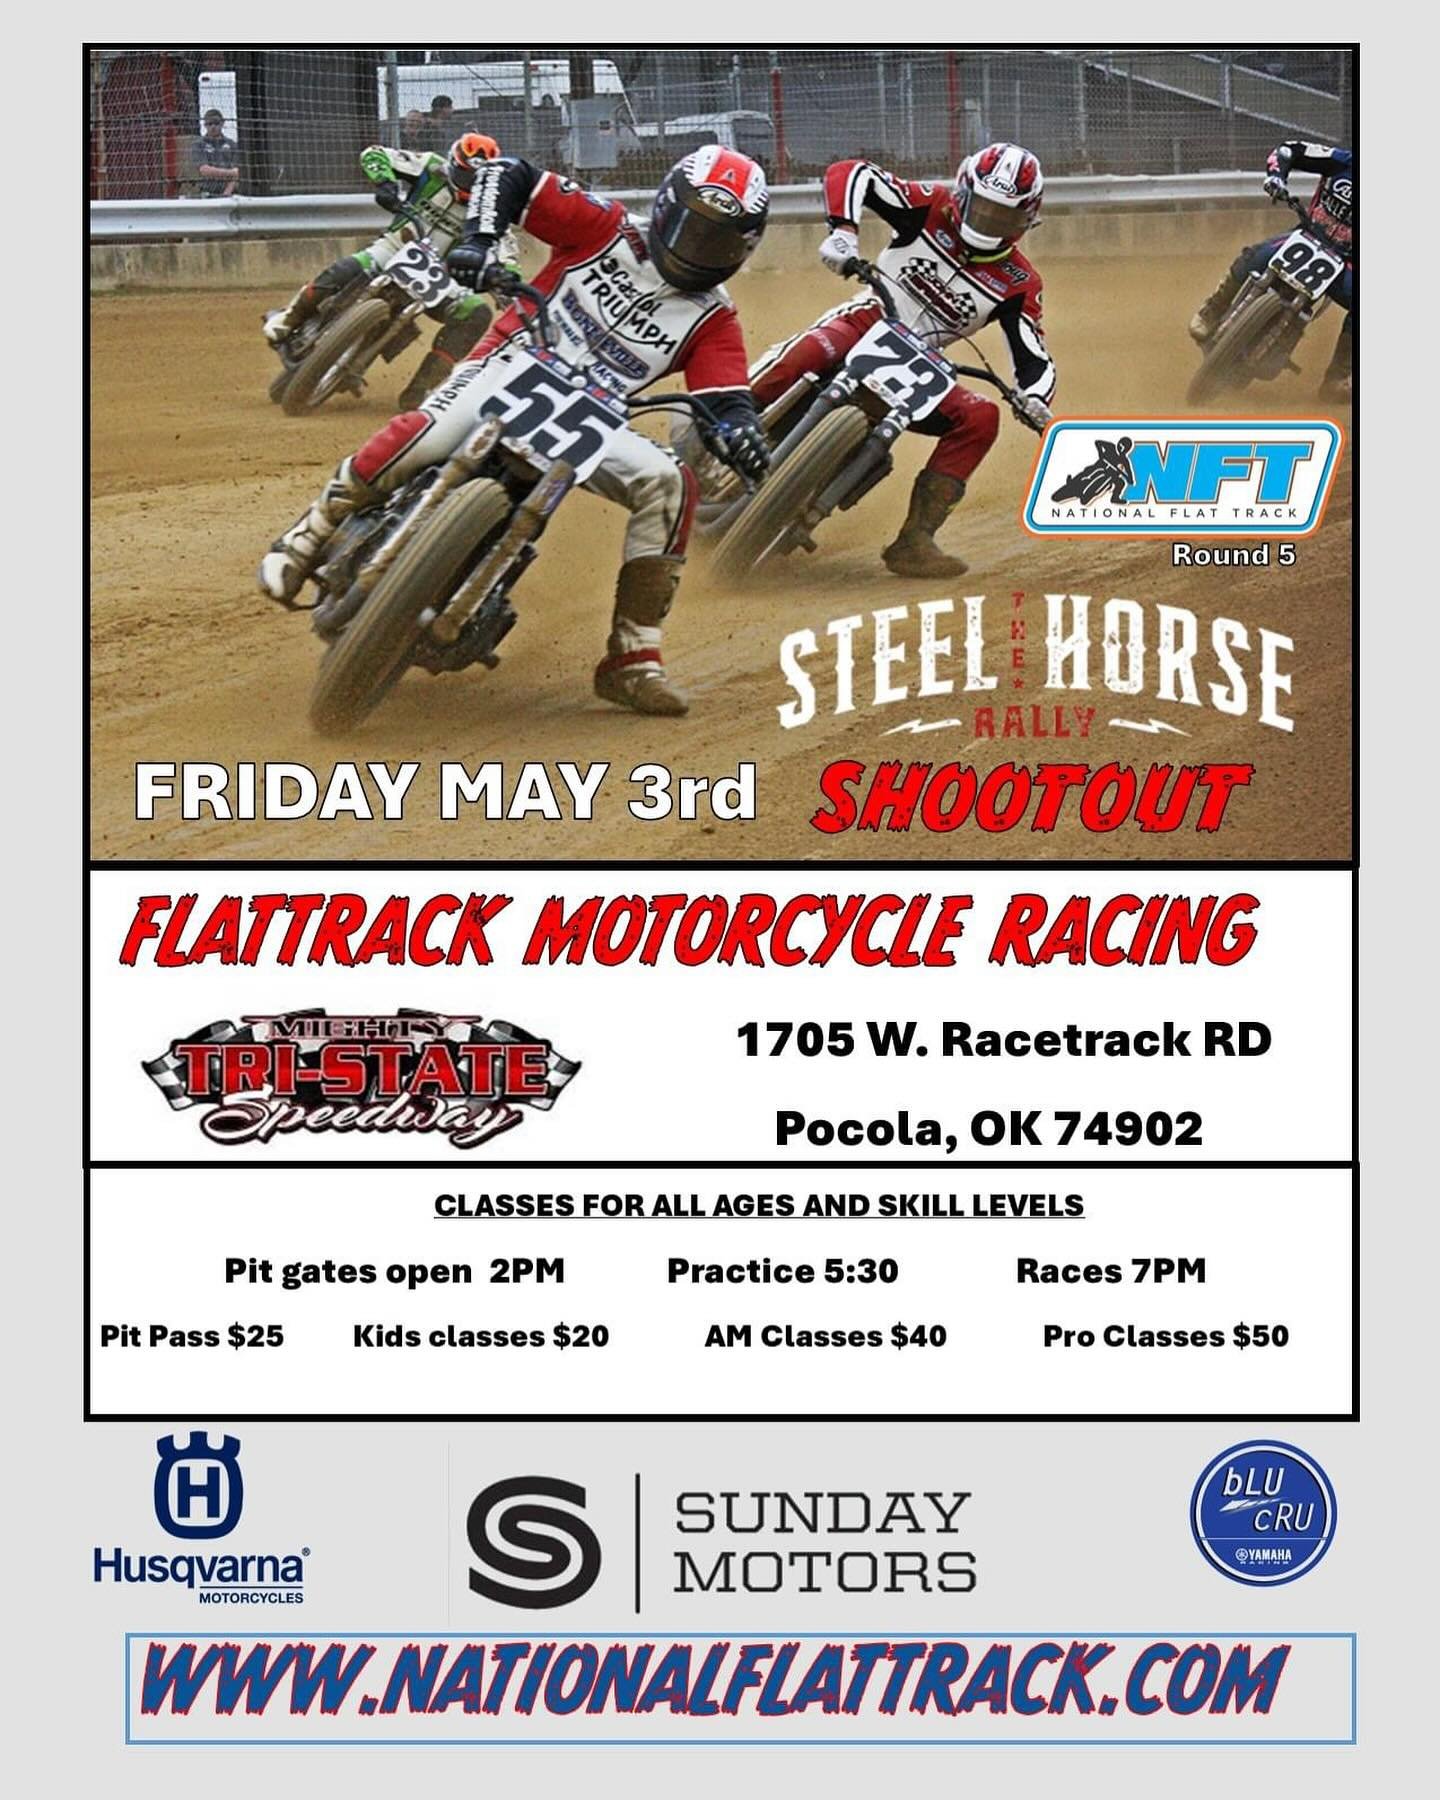 The famous Steel Horse Shootout at the mighty Tri-State Speedway is coming up Friday May 3rd! This 3/8 Mile banked track has been voted one of our best prepared racetracks 5 years running and always provides some terrific racing.
OPEN PRO class pays 